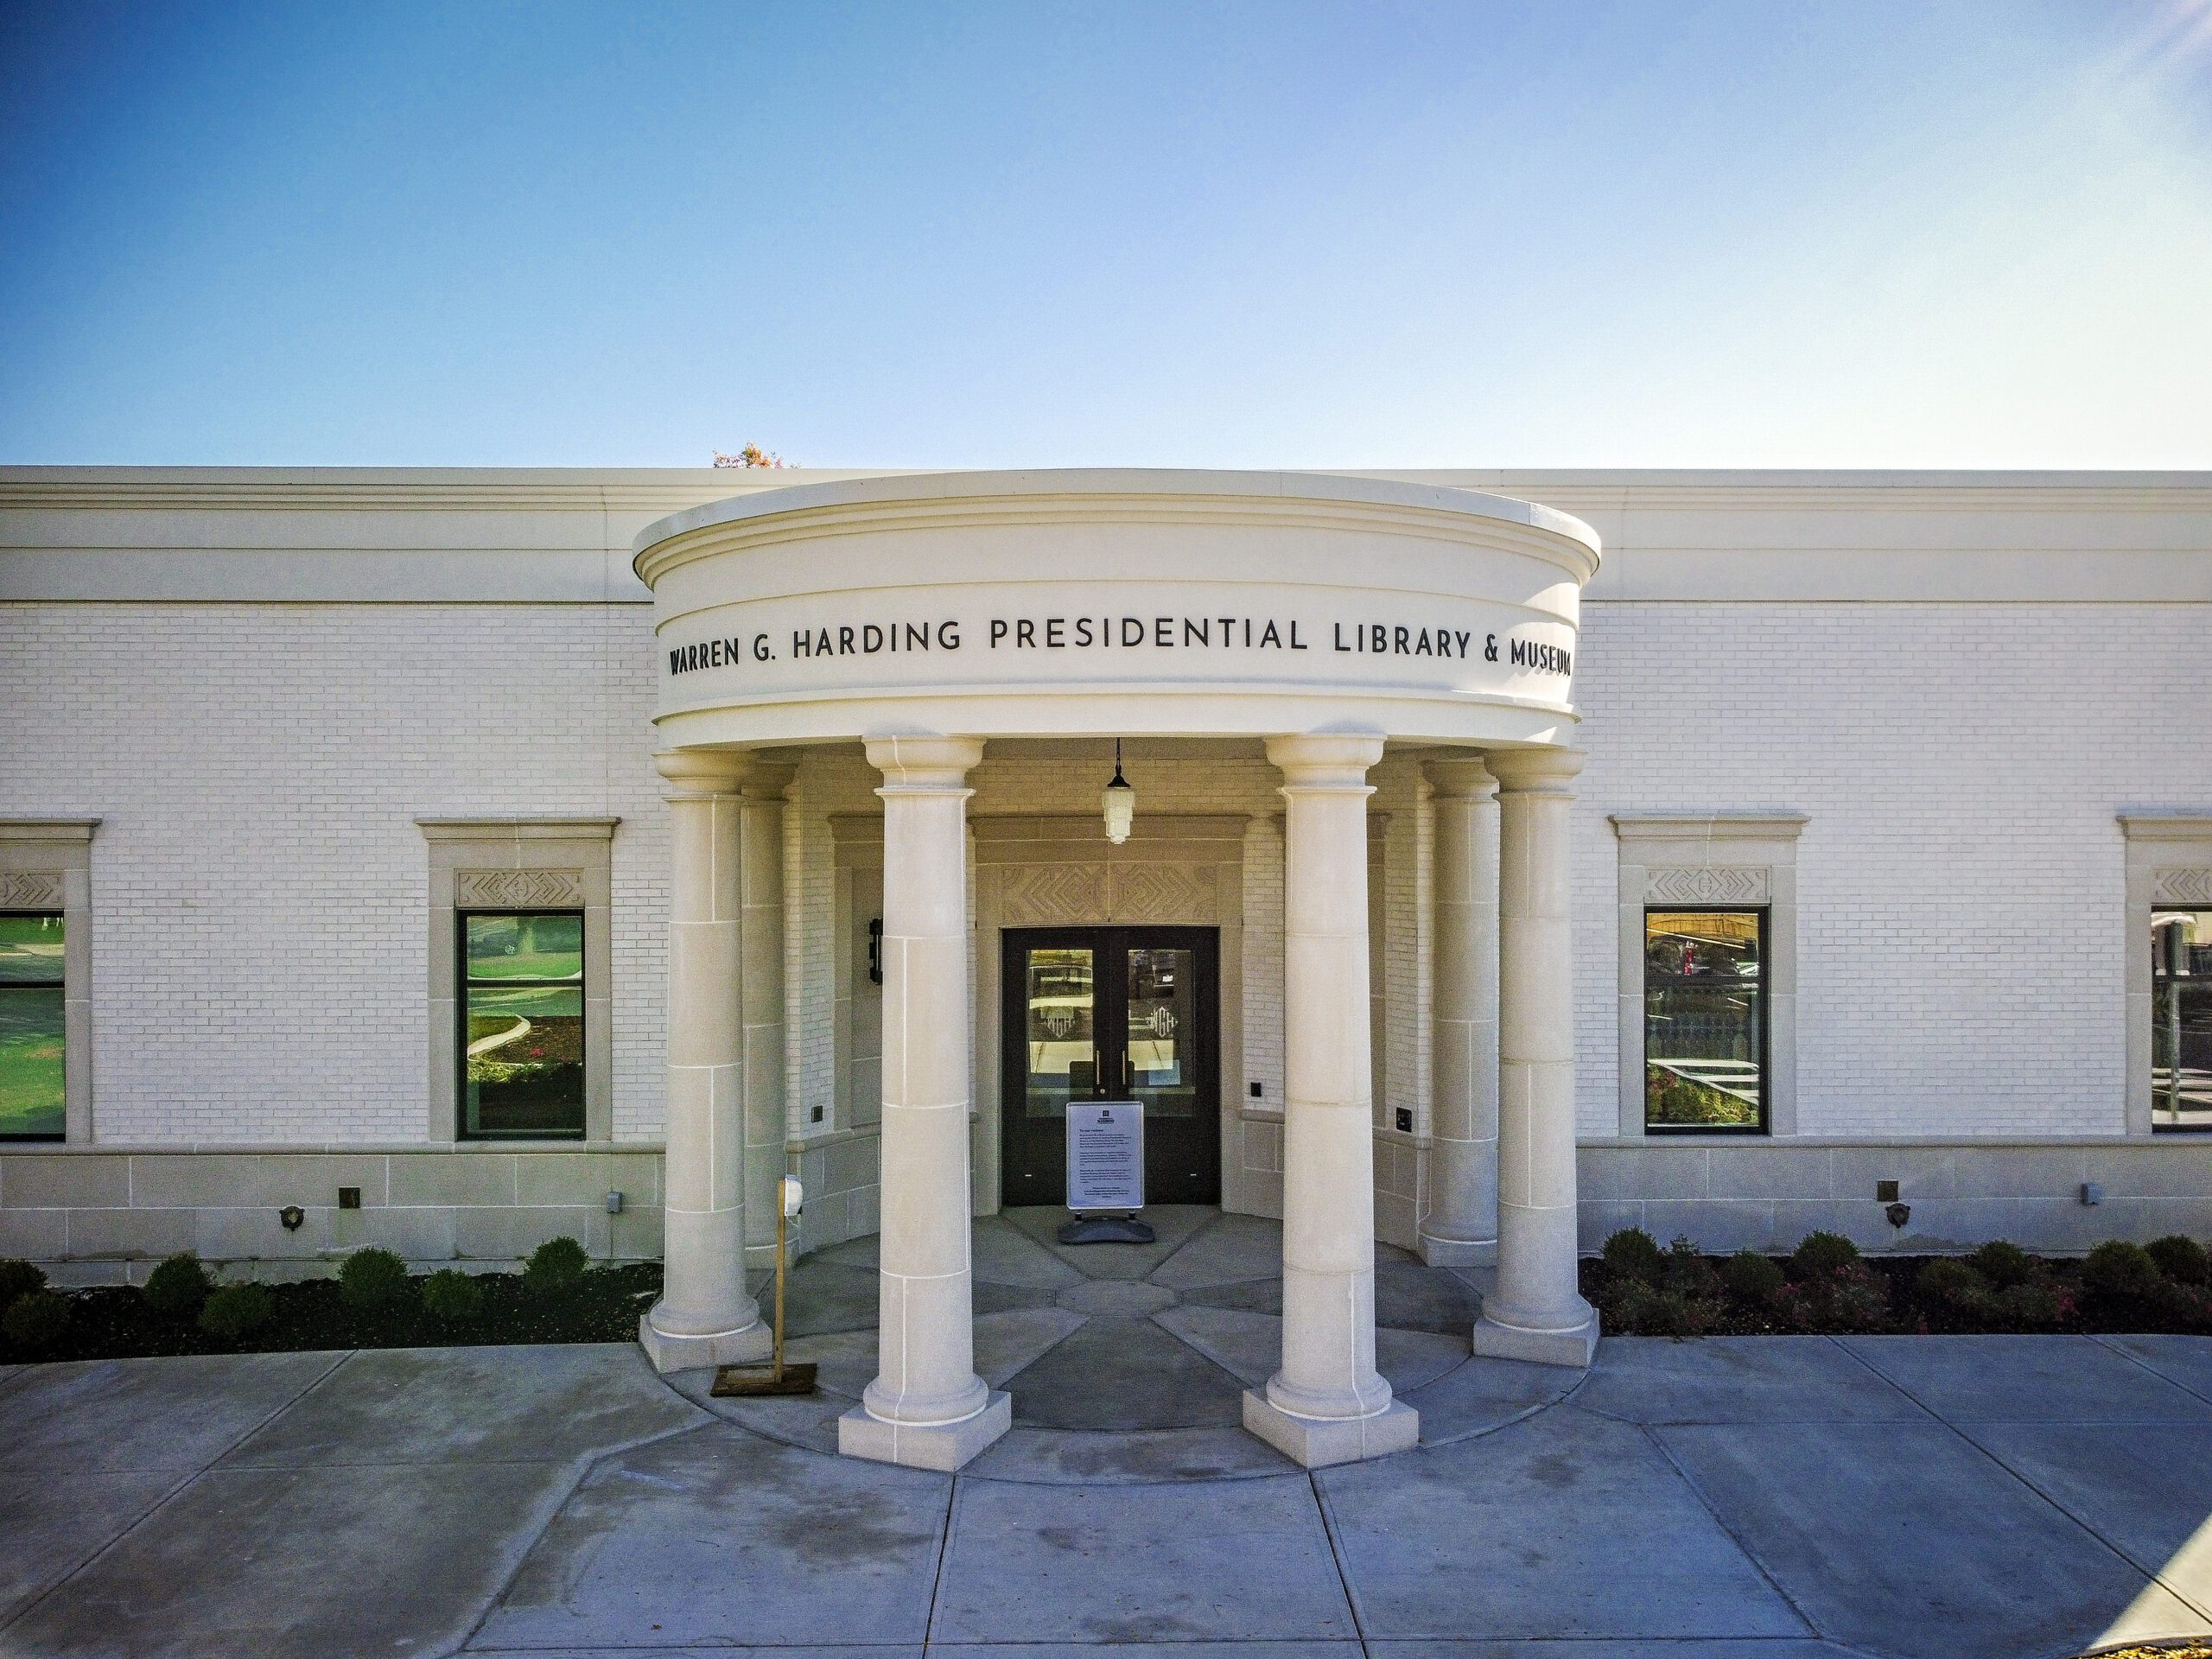 The Warren G. Harding Presidential Library and Museum, a large white building, photographed Tuesday, October 13, 2020 in Marion, Ohio.